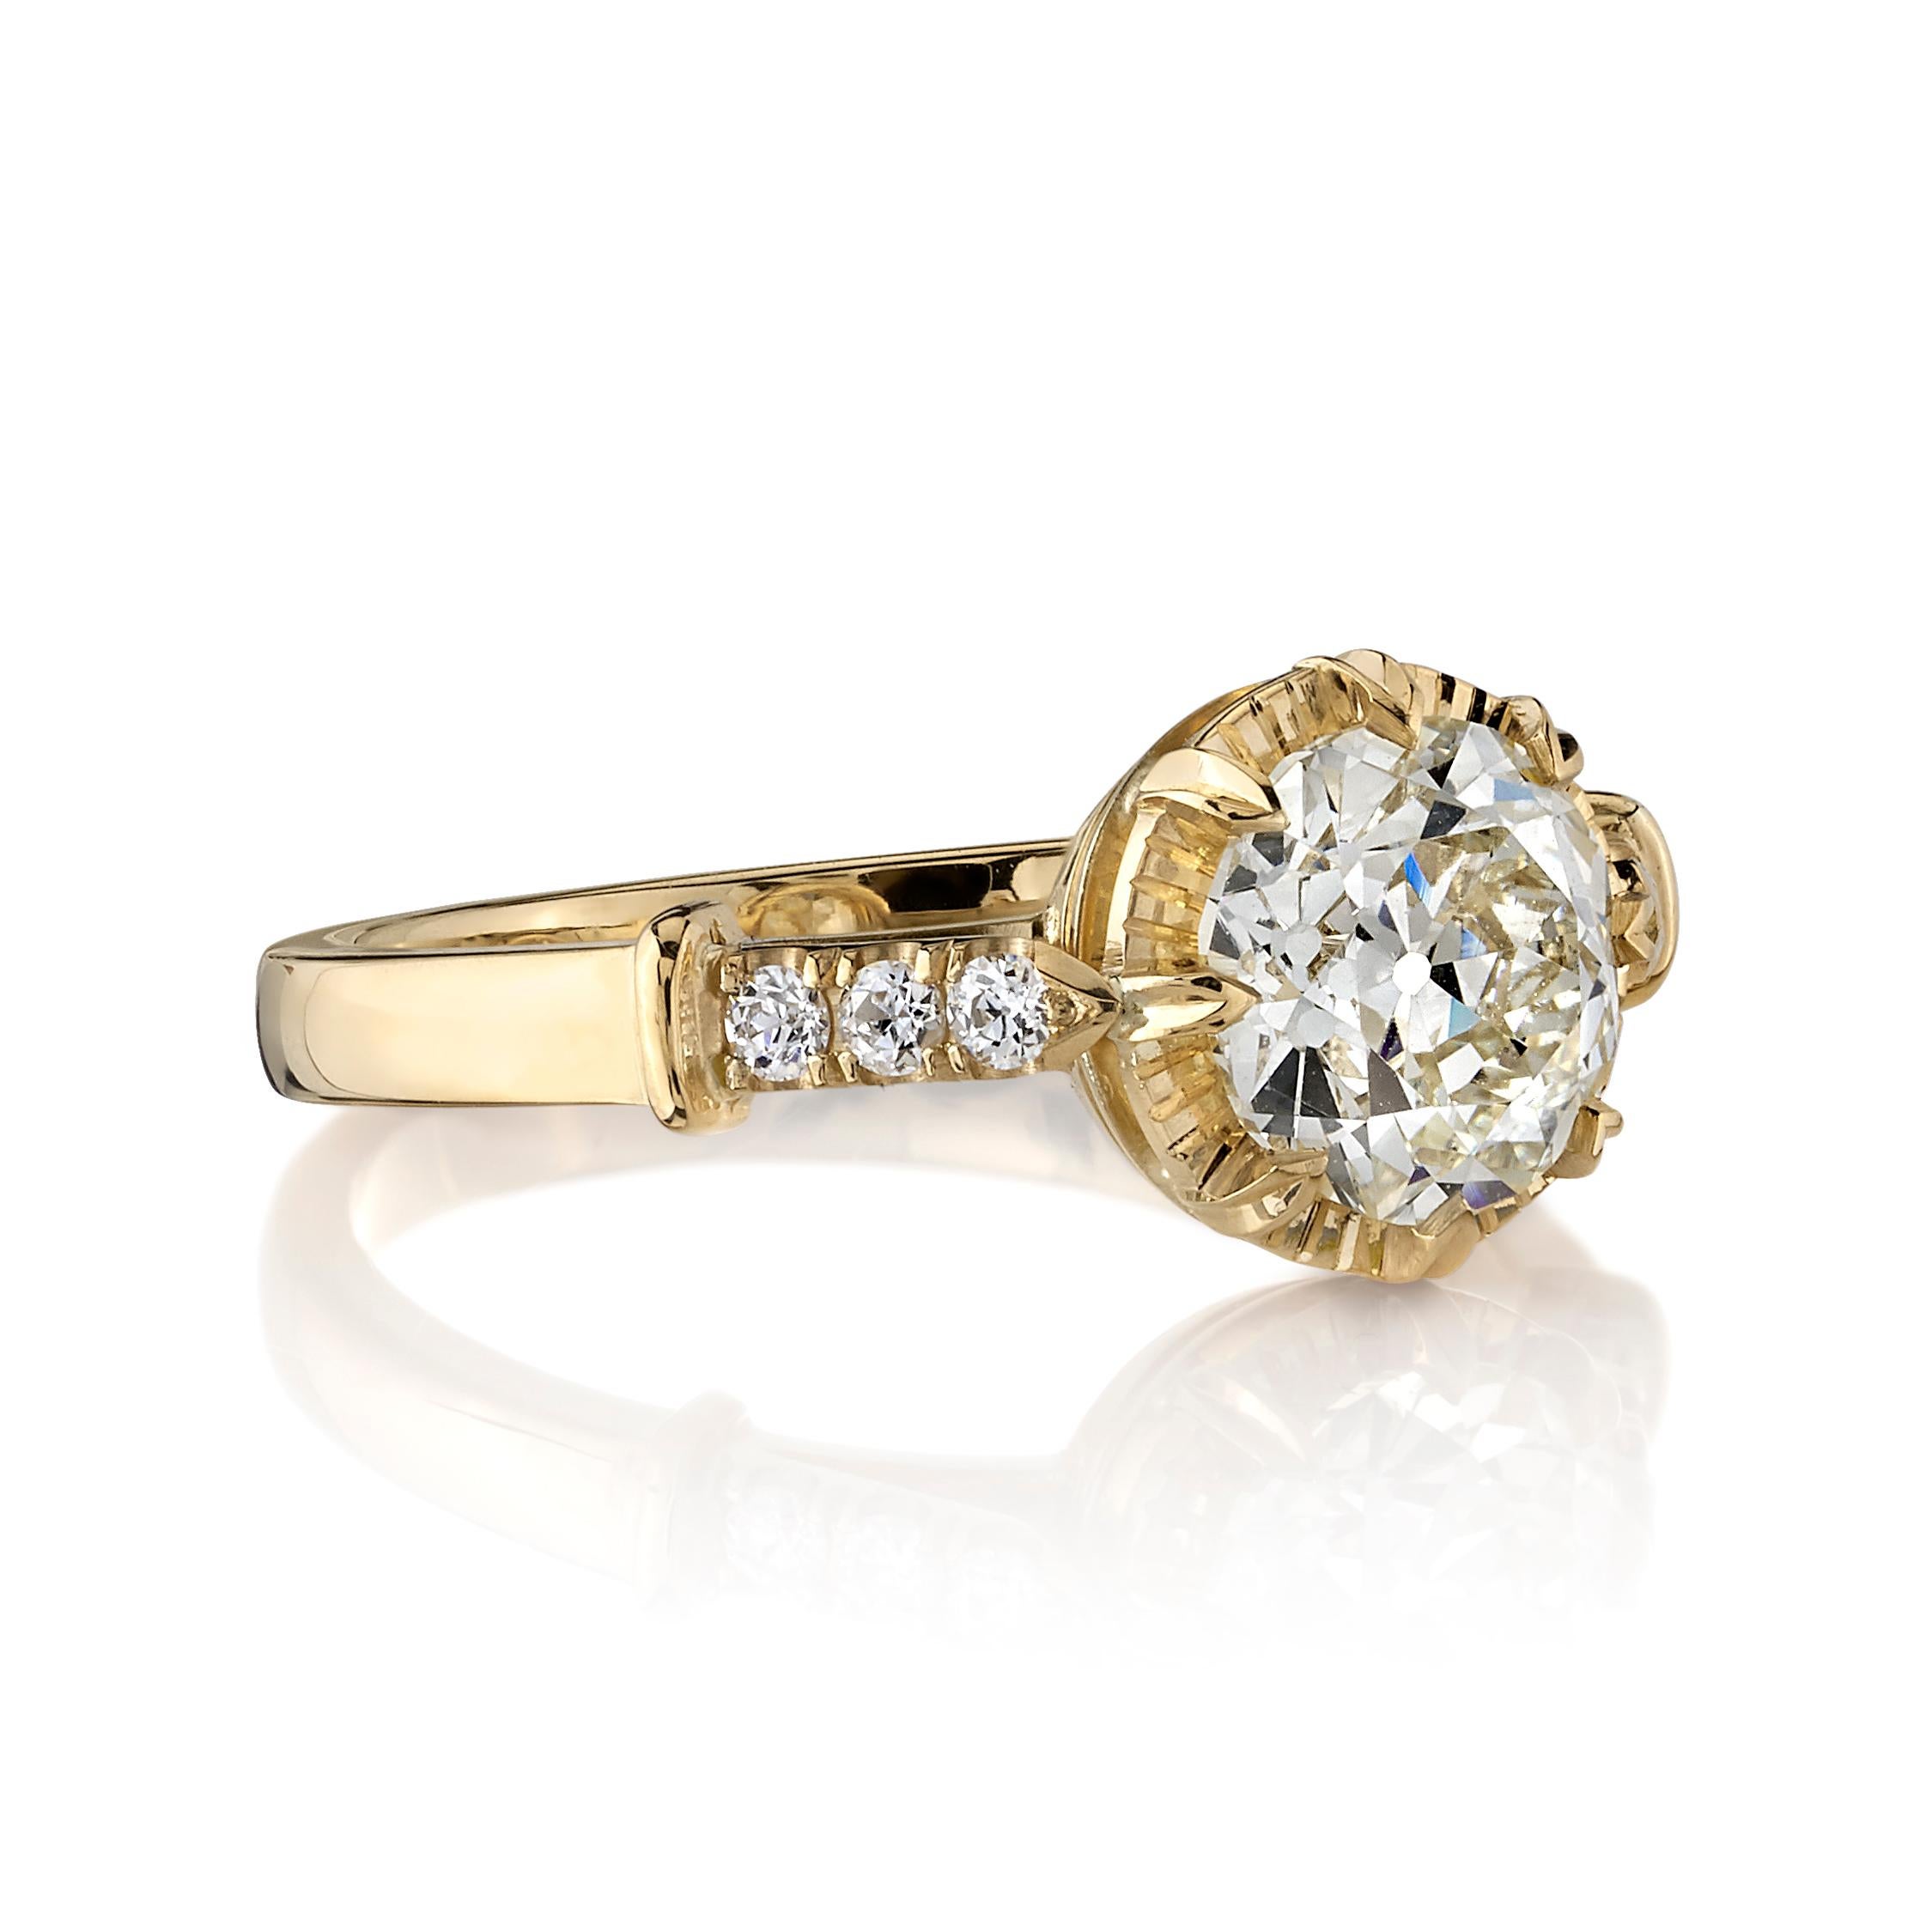 1.40ctw M/VS2 GIA certified old European cut diamond with 0.11ctw old European cut accent diamonds set in a handcrafted 18K yellow gold mounting.

Ring is currently a size 6 and can be sized to fit.